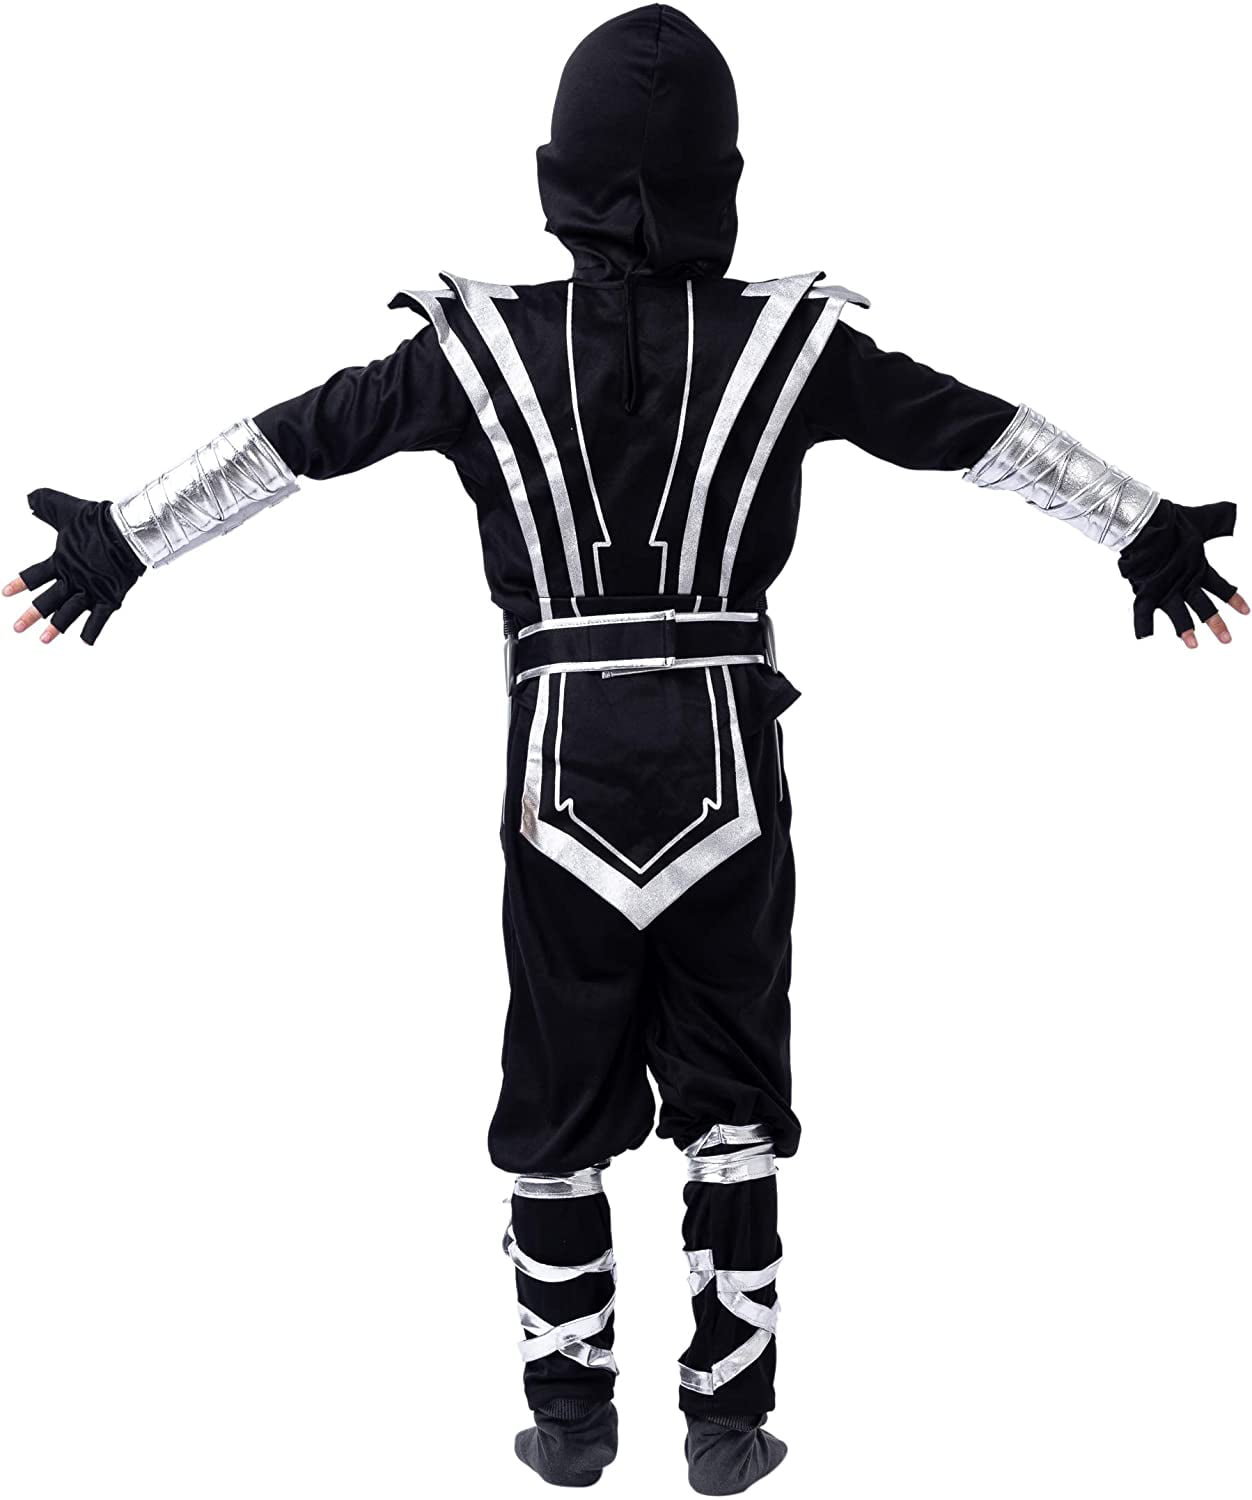 Silver Ninja Child Costume with Foam Accessories for Halloween Kids Kung Fu Outfit